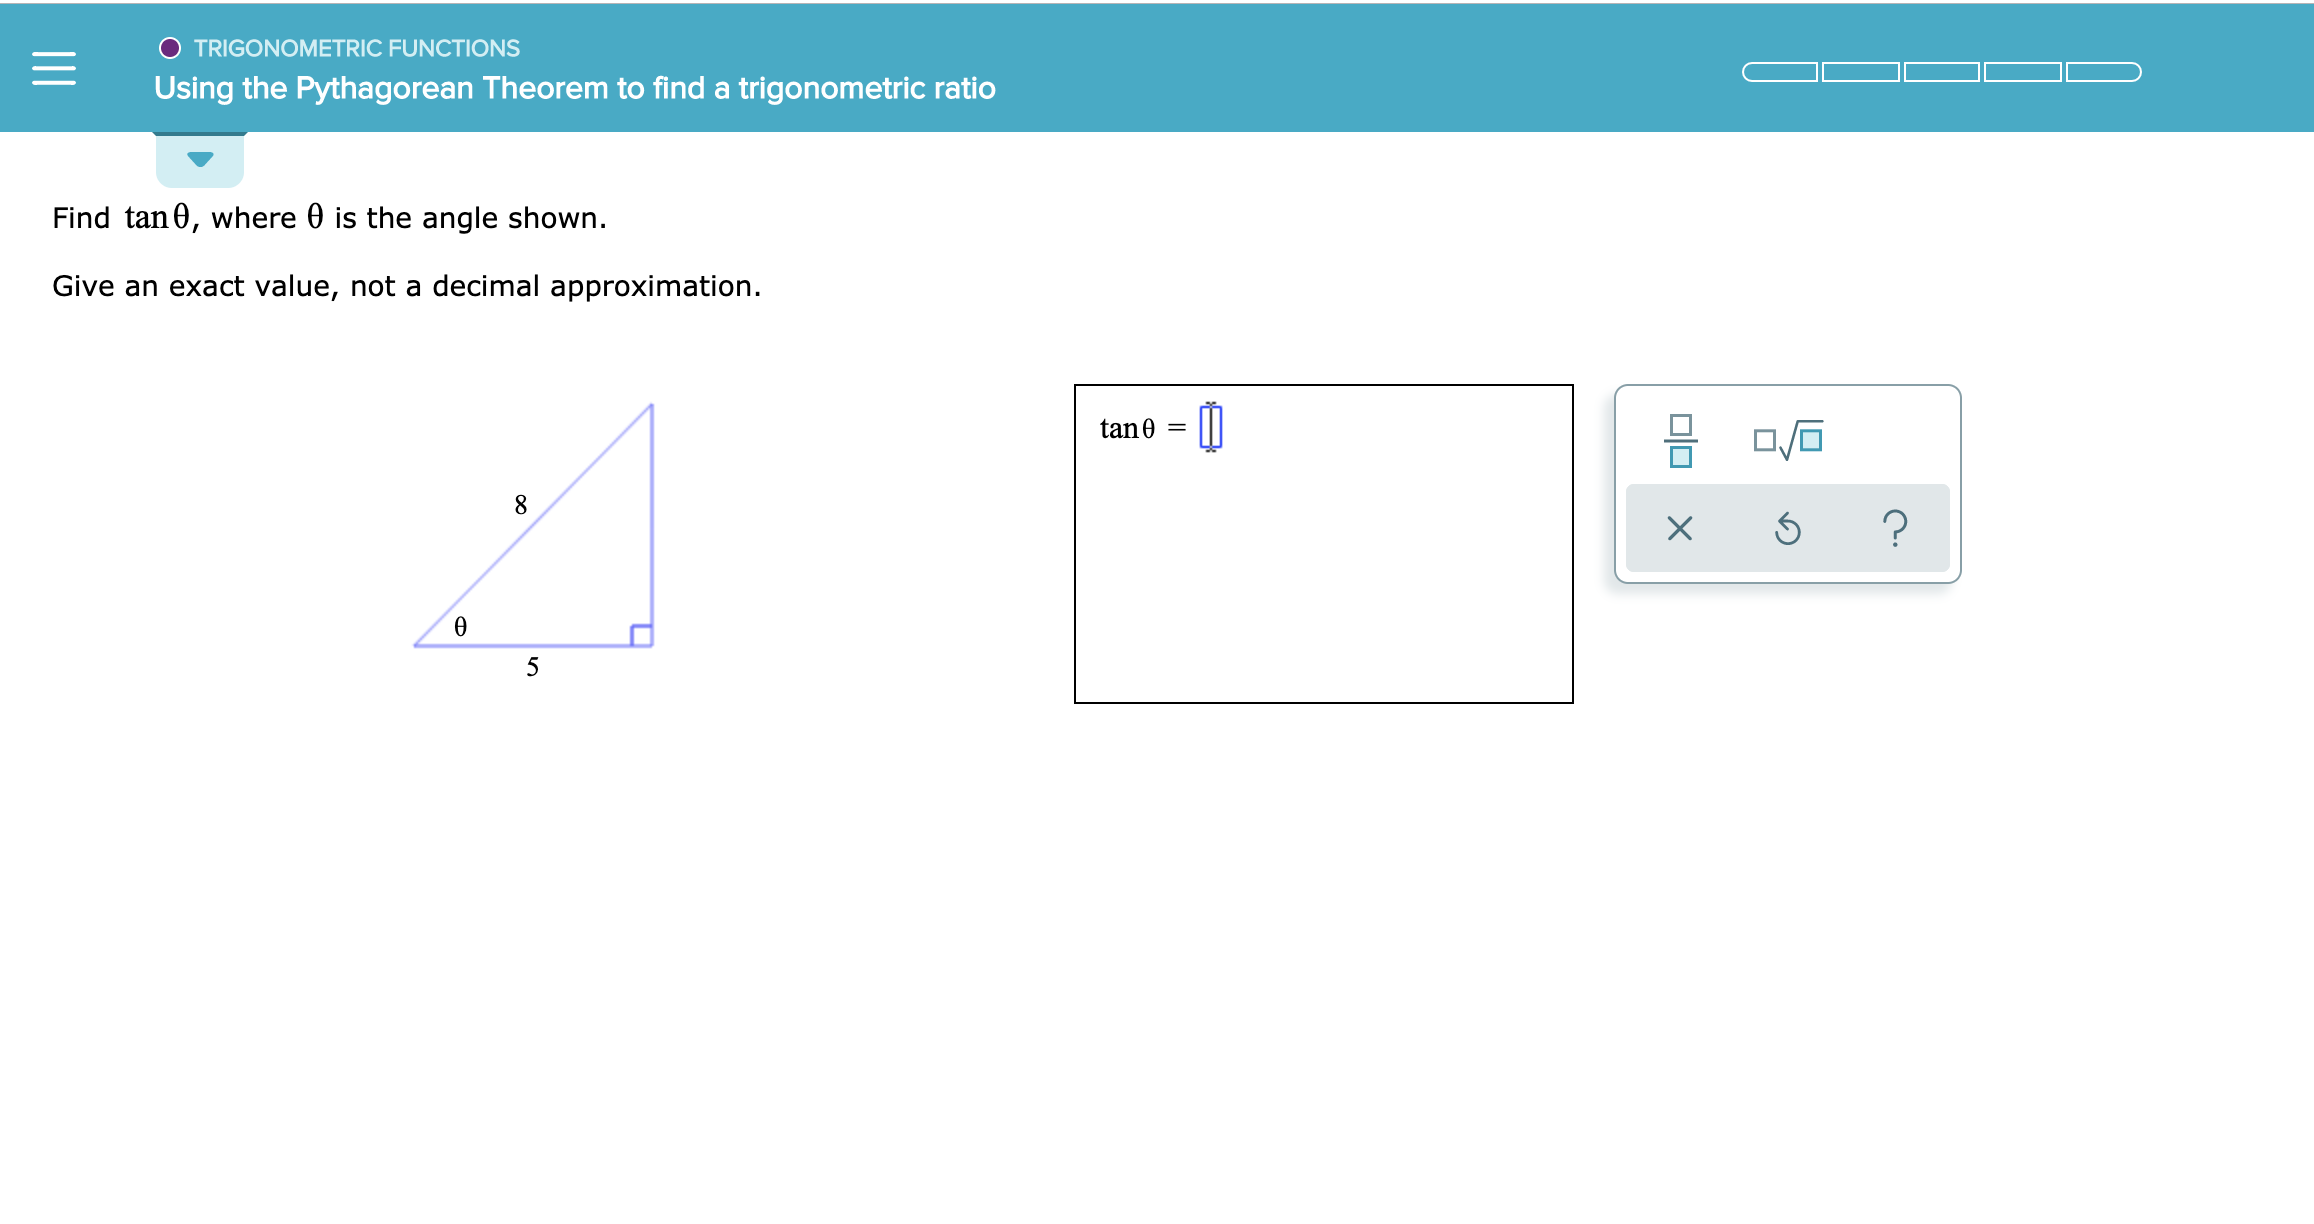 TRIGONOMETRIC FUNCTIONS
Using the Pythagorean Theorem to find a trigonometric ratio
Find tan0, where 0 is the angle shown.
Give an exact value, not a decimal approximation.
tan0
=
?
X
5
